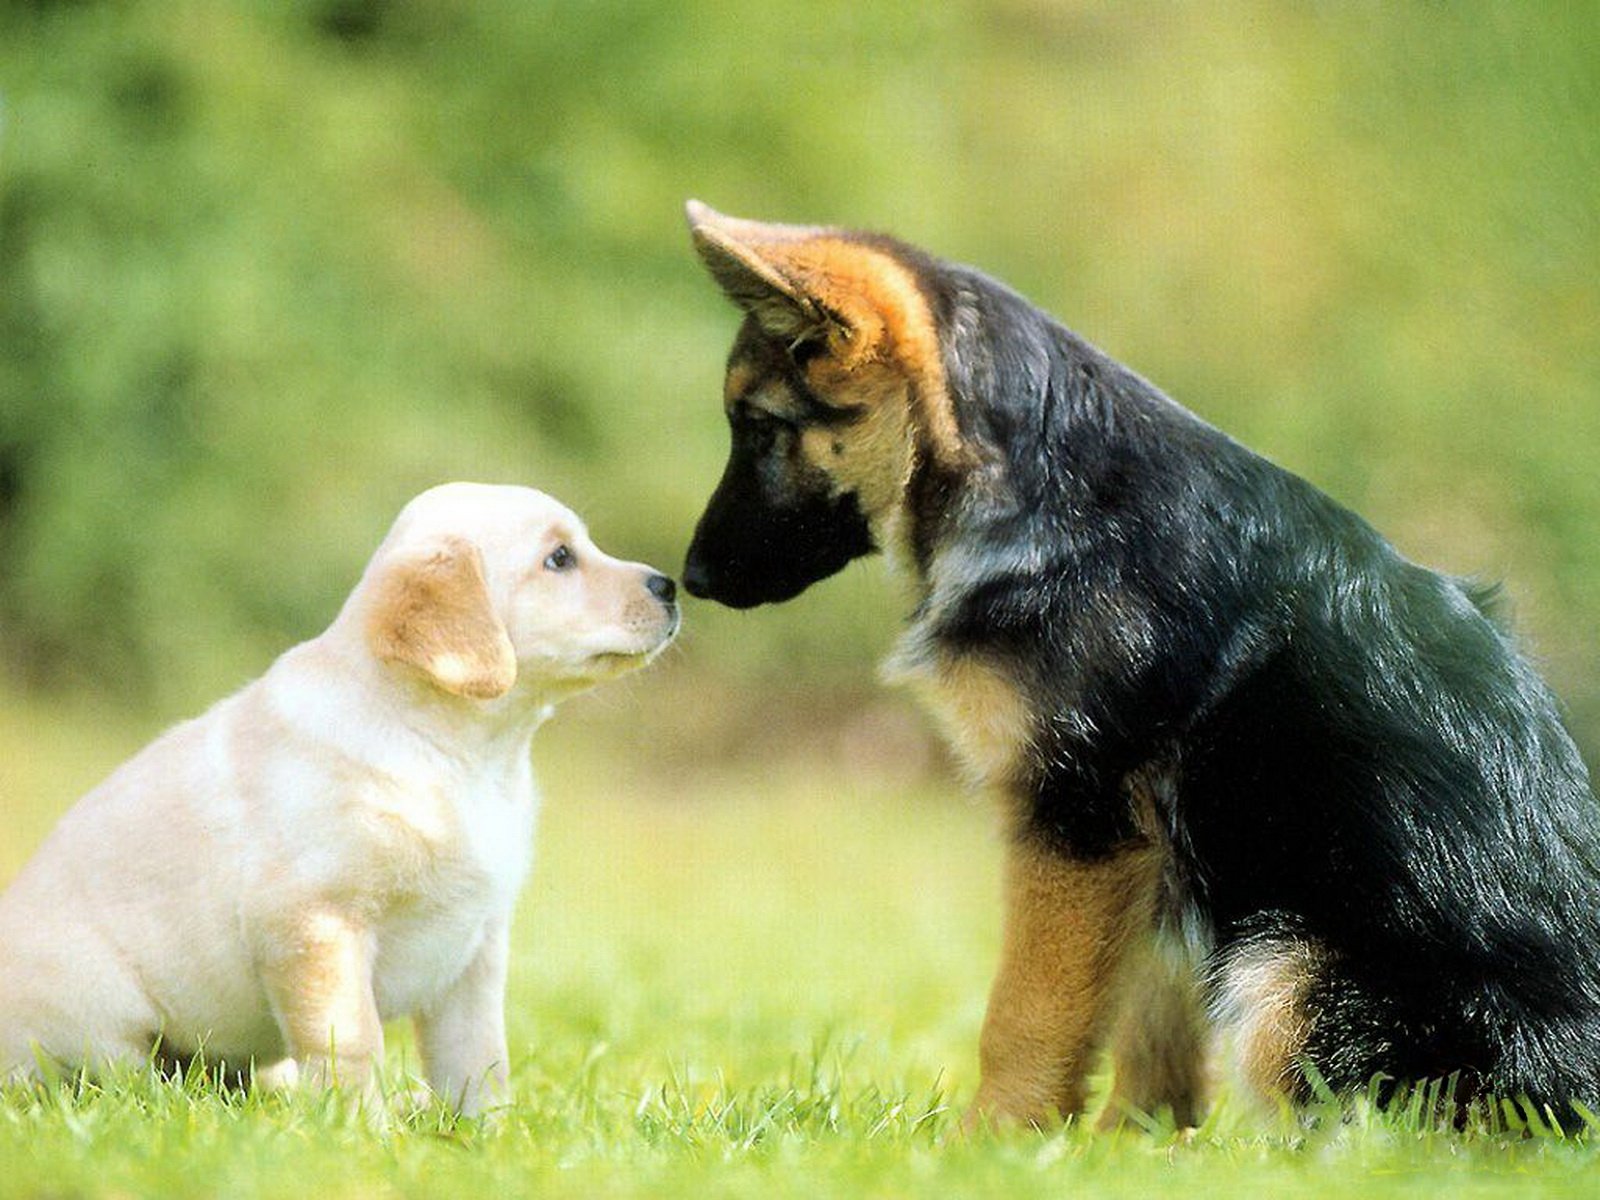  cute dogs care and affection amongst dogs love contrast cute dogs dogs 1600x1200